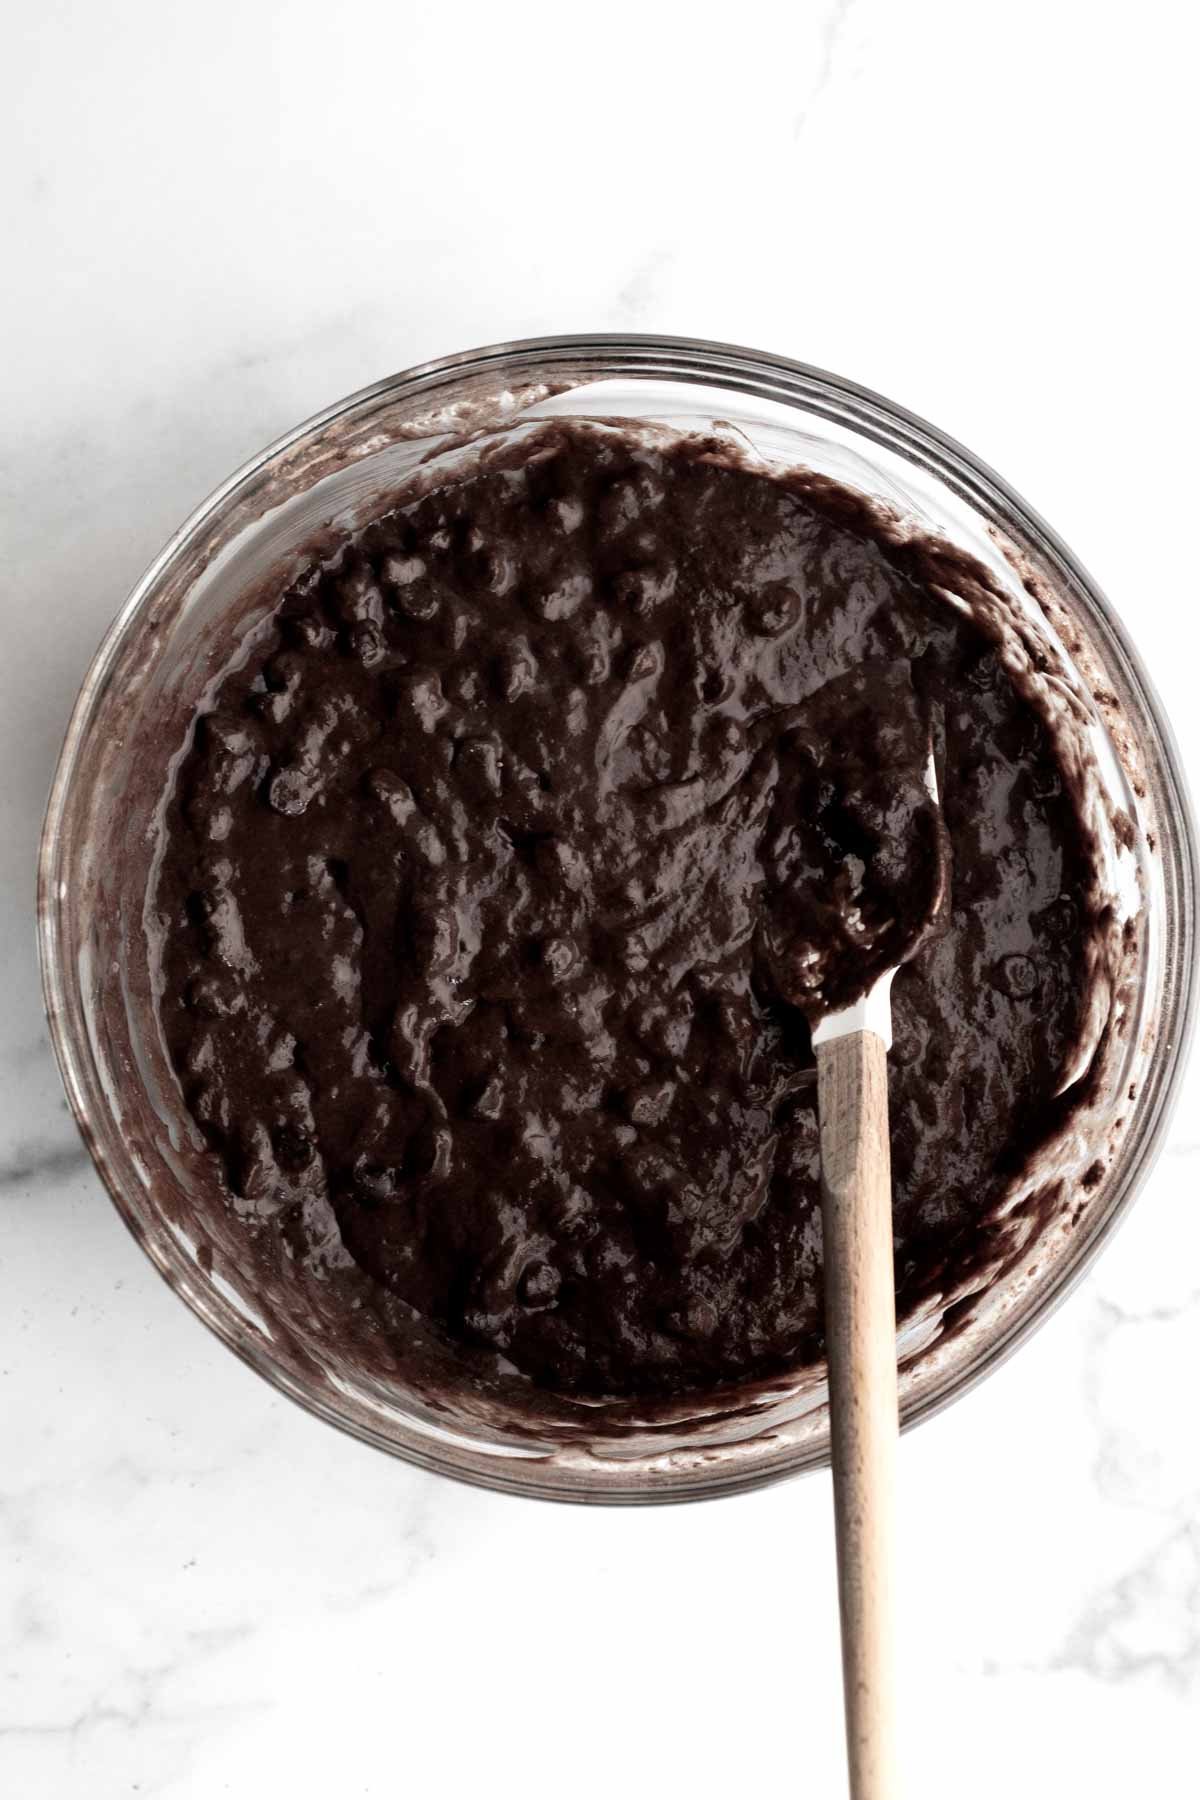 The chocolate chips are mixed thoroughly in the batter.